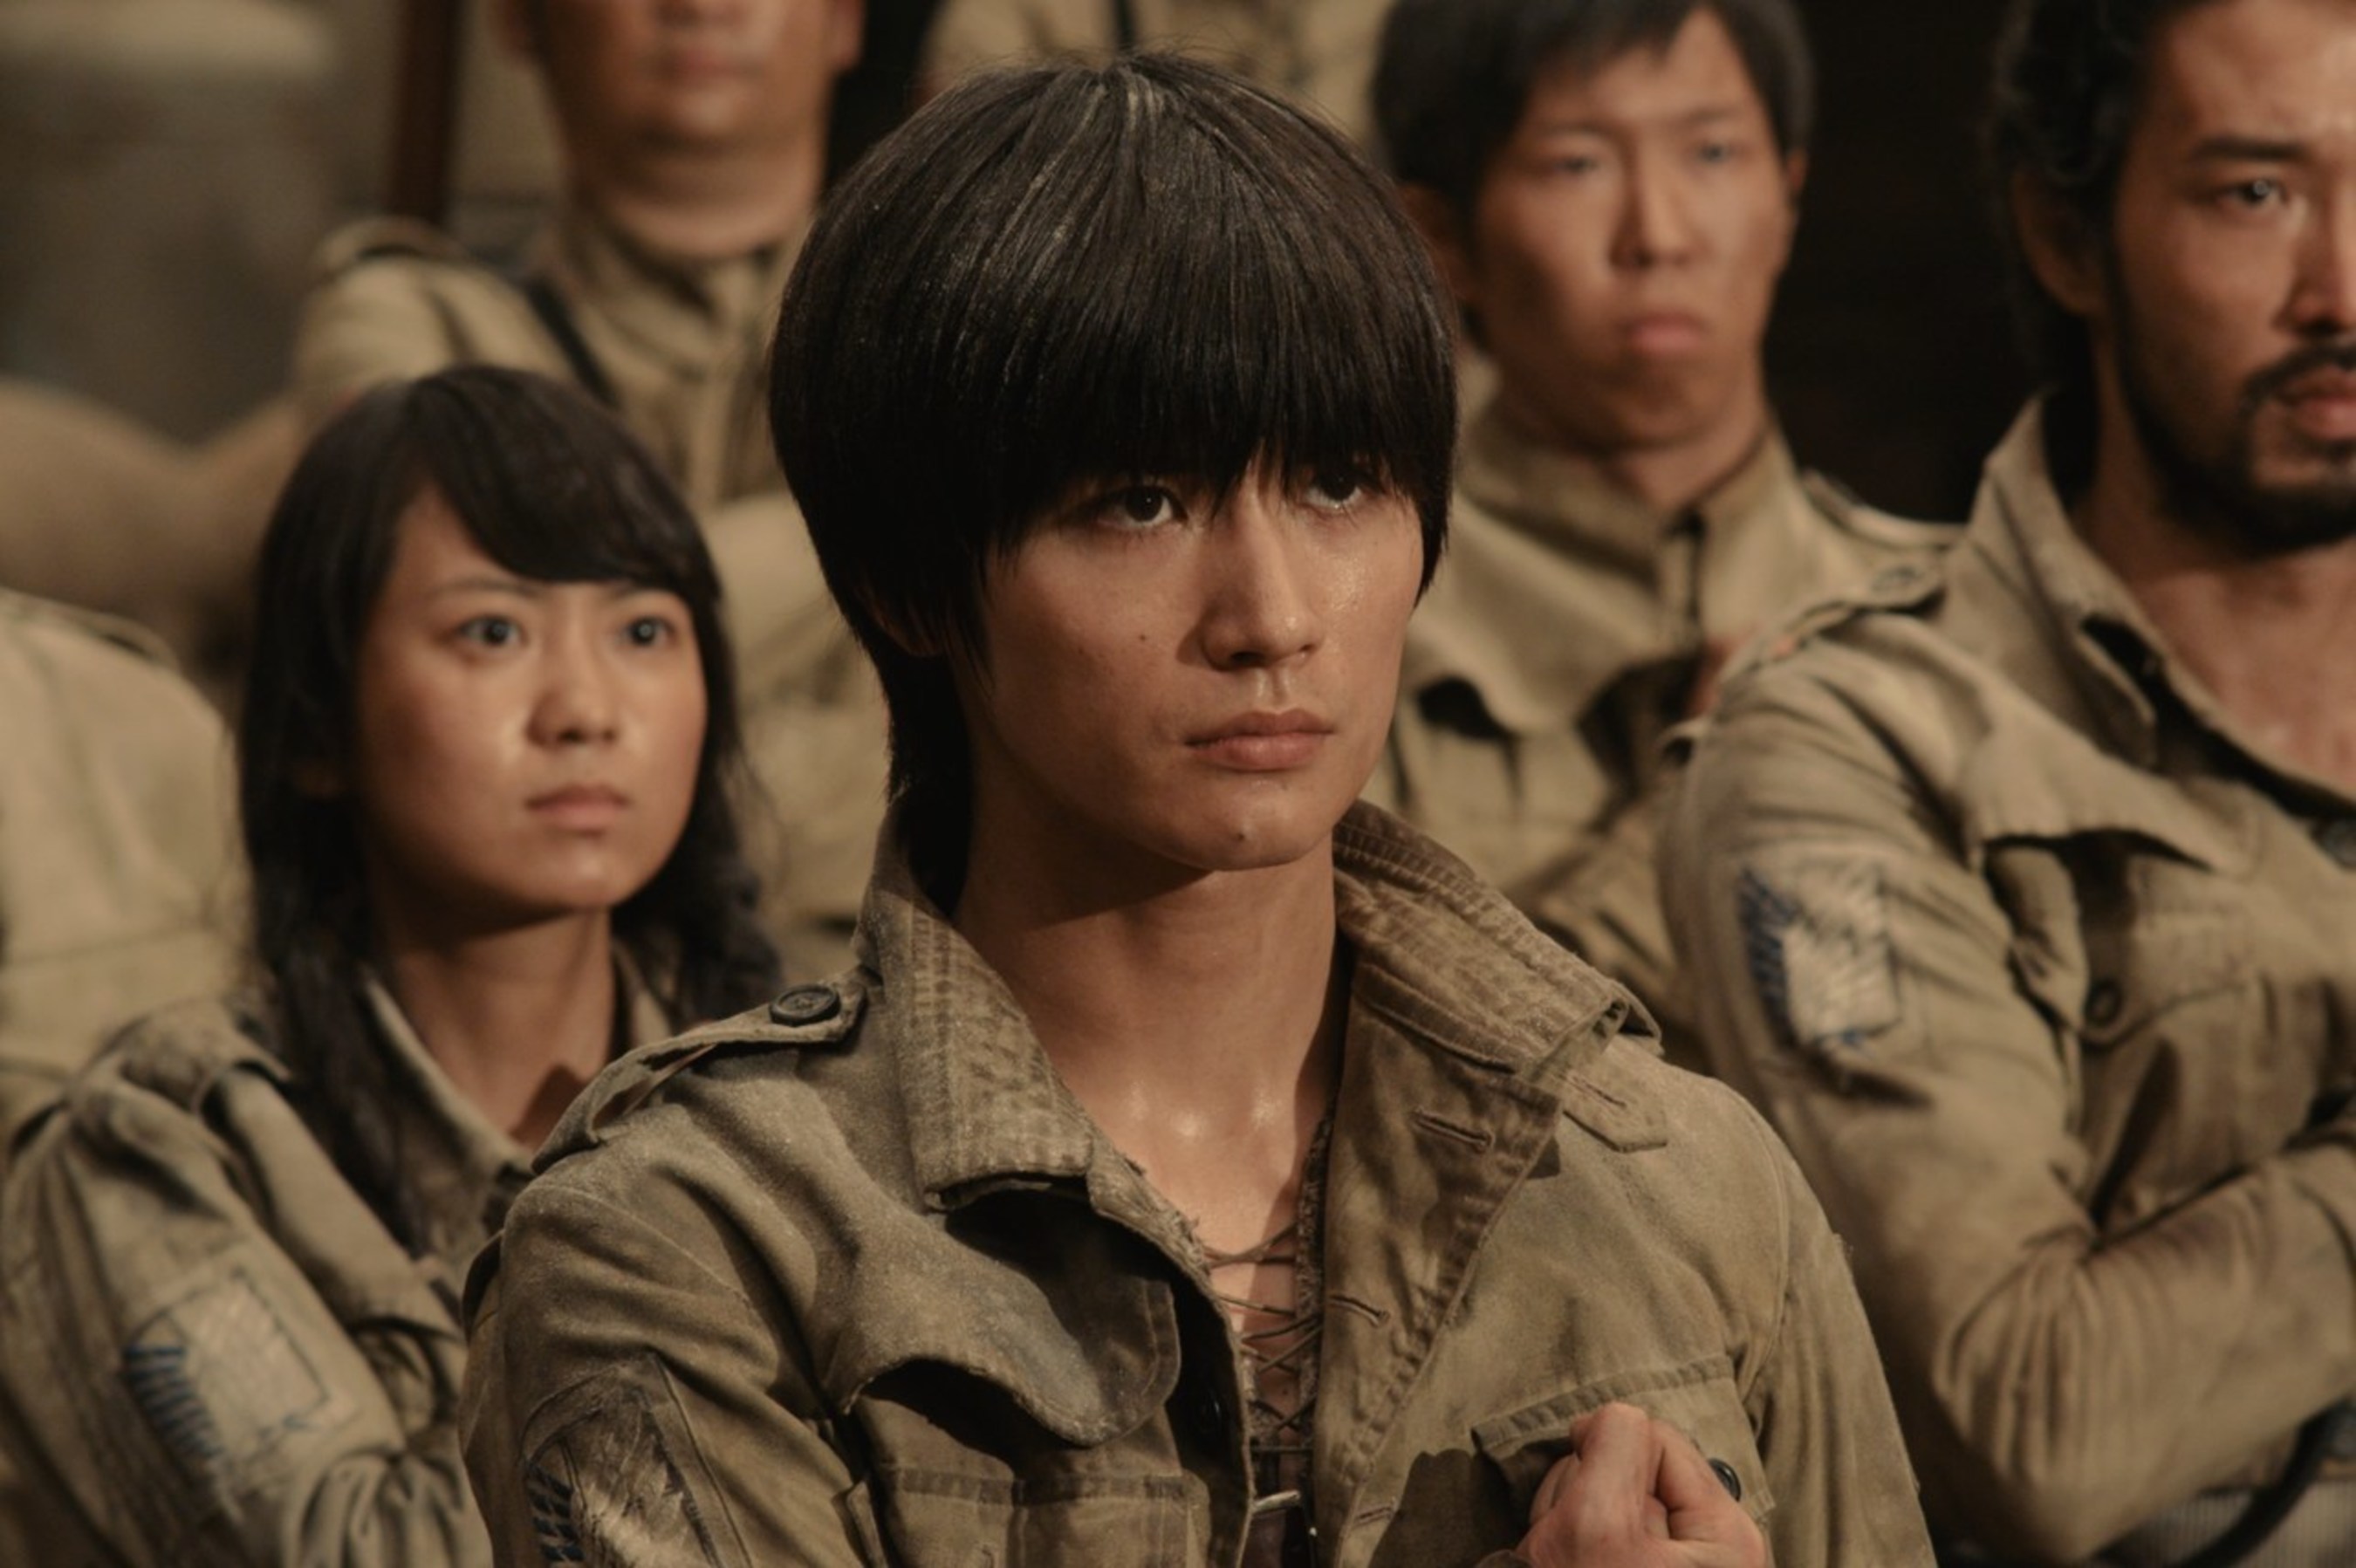 Still from "Attack on Titan" live action movie.